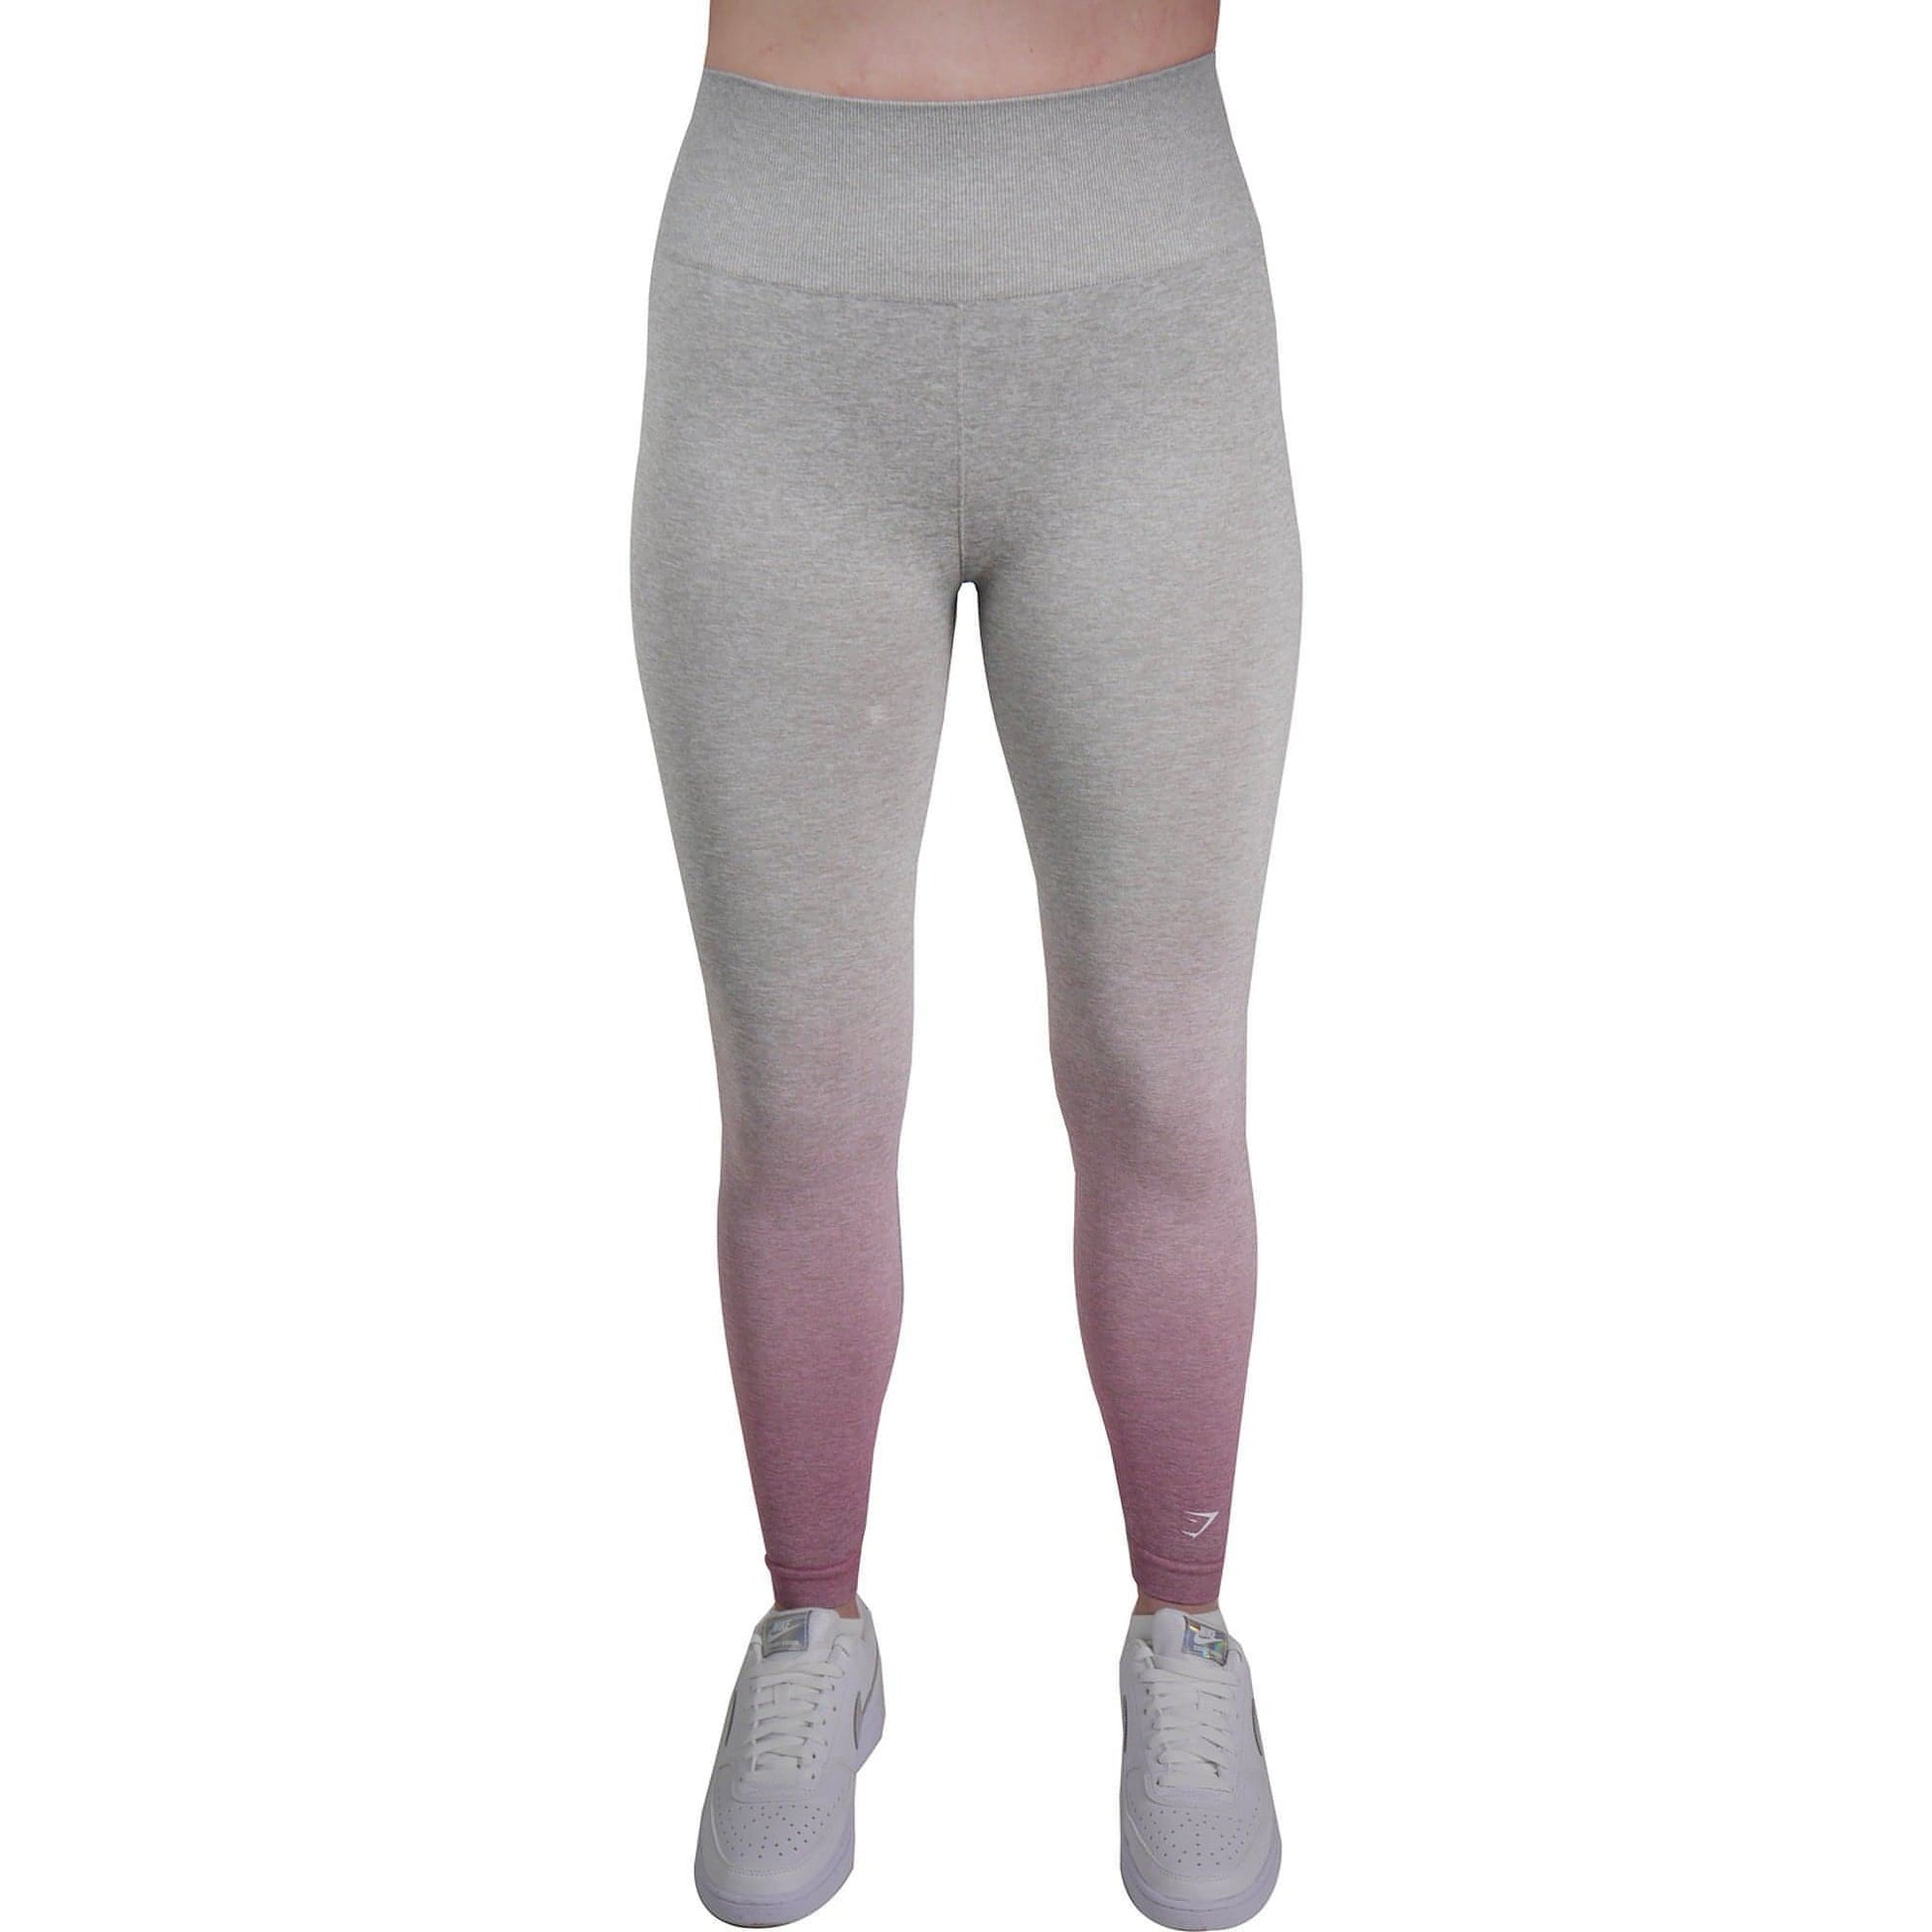 Ombre Seamless High Waist Seamless Yoga Tights For Women Sexy